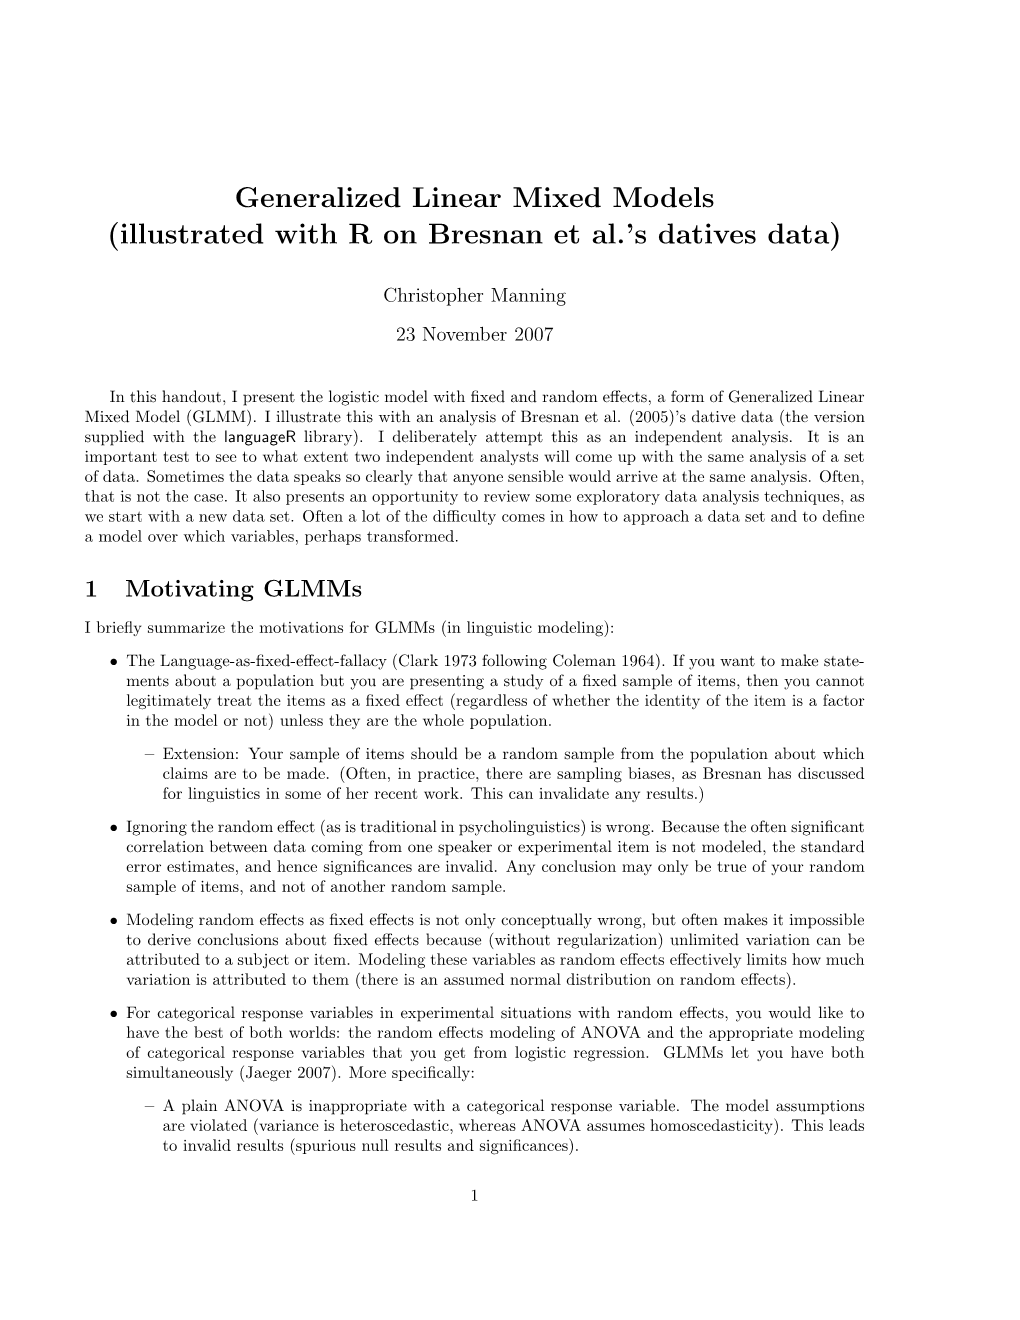 Generalized Linear Mixed Models (Illustrated with R on Bresnan Et Al.’S Datives Data)